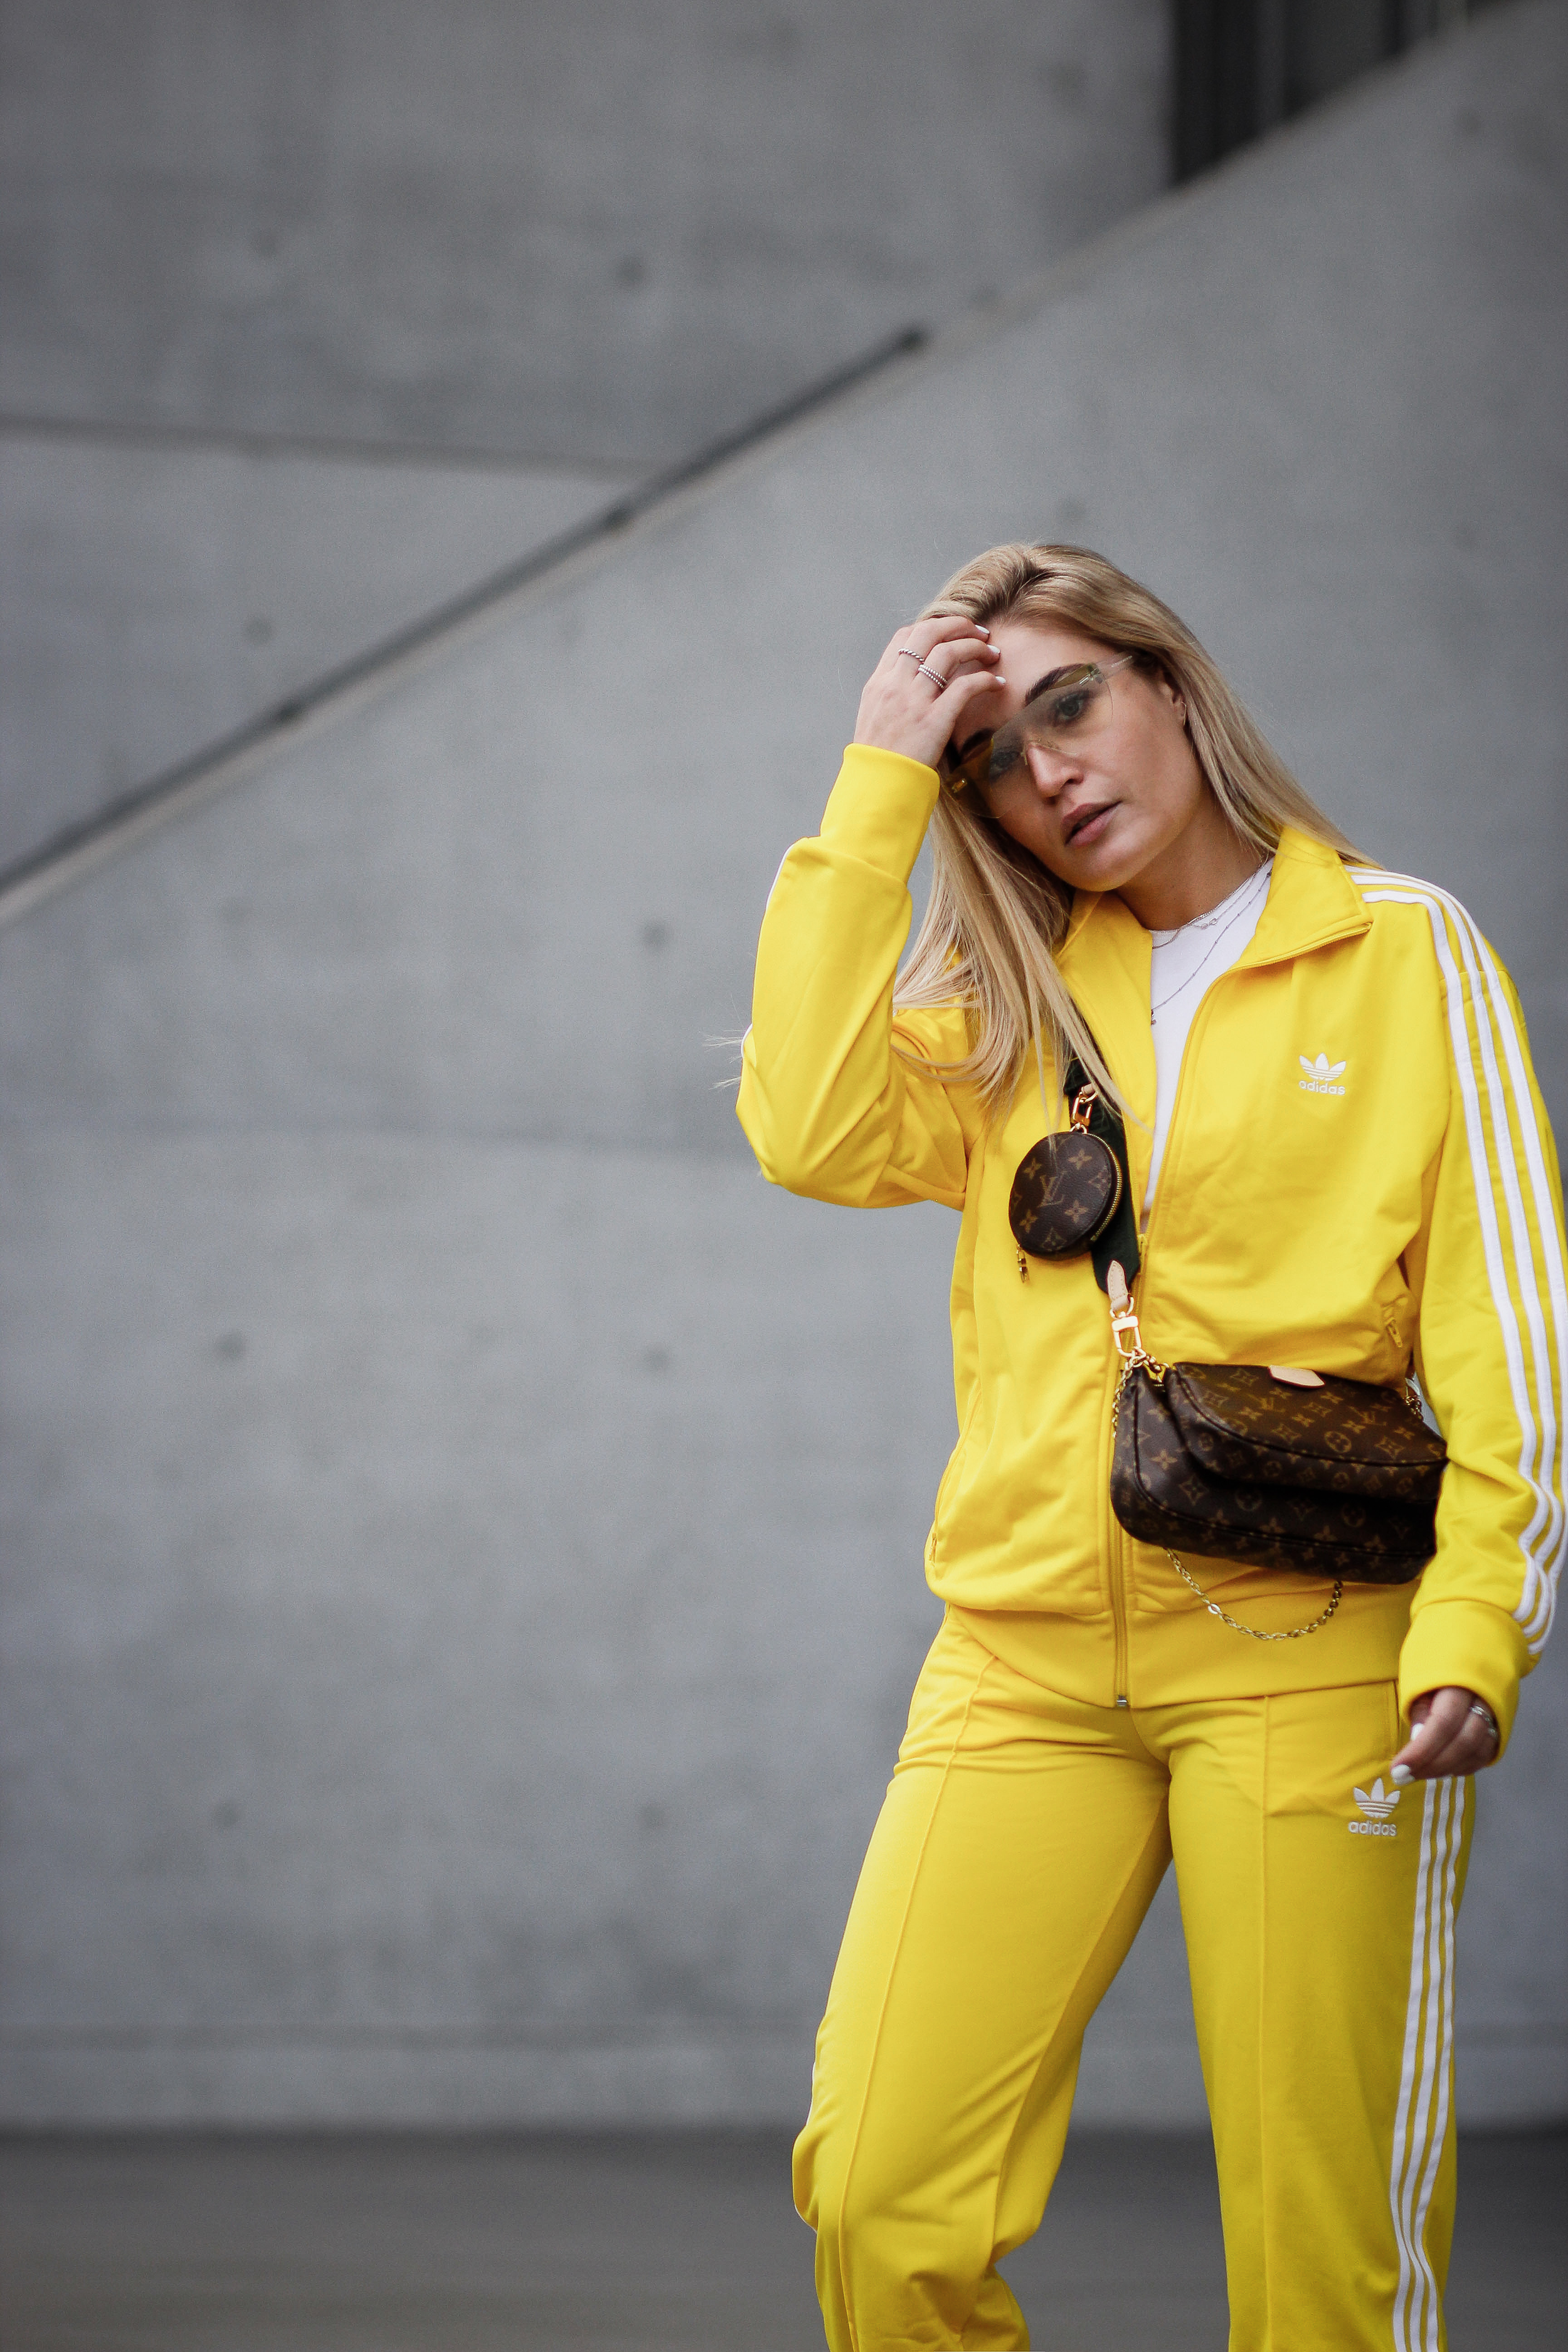 Lauralamode Adidas Outfit Tracksuit Streetstyle Look Outfitoftheday Louis Vuitton Louis Vuitton Multipochette Balenciaga Triple S Munich Berlin Blogger Fashionblogger13